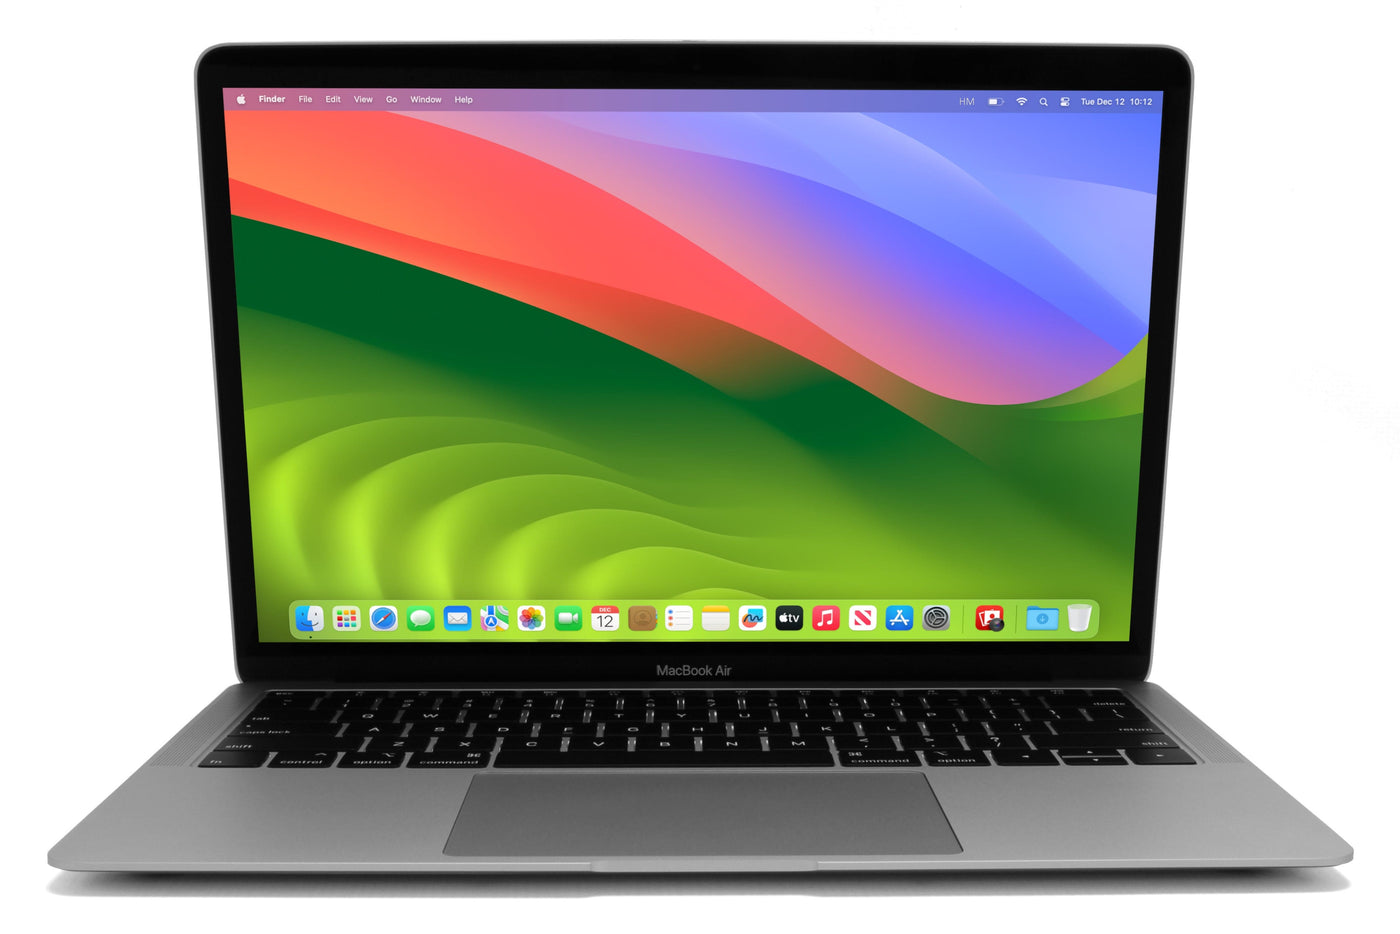 Apple MacBook Air 13-inch MacBook Air 13-inch Core i5 1.6GHz (Silver, 2019) - Excellent